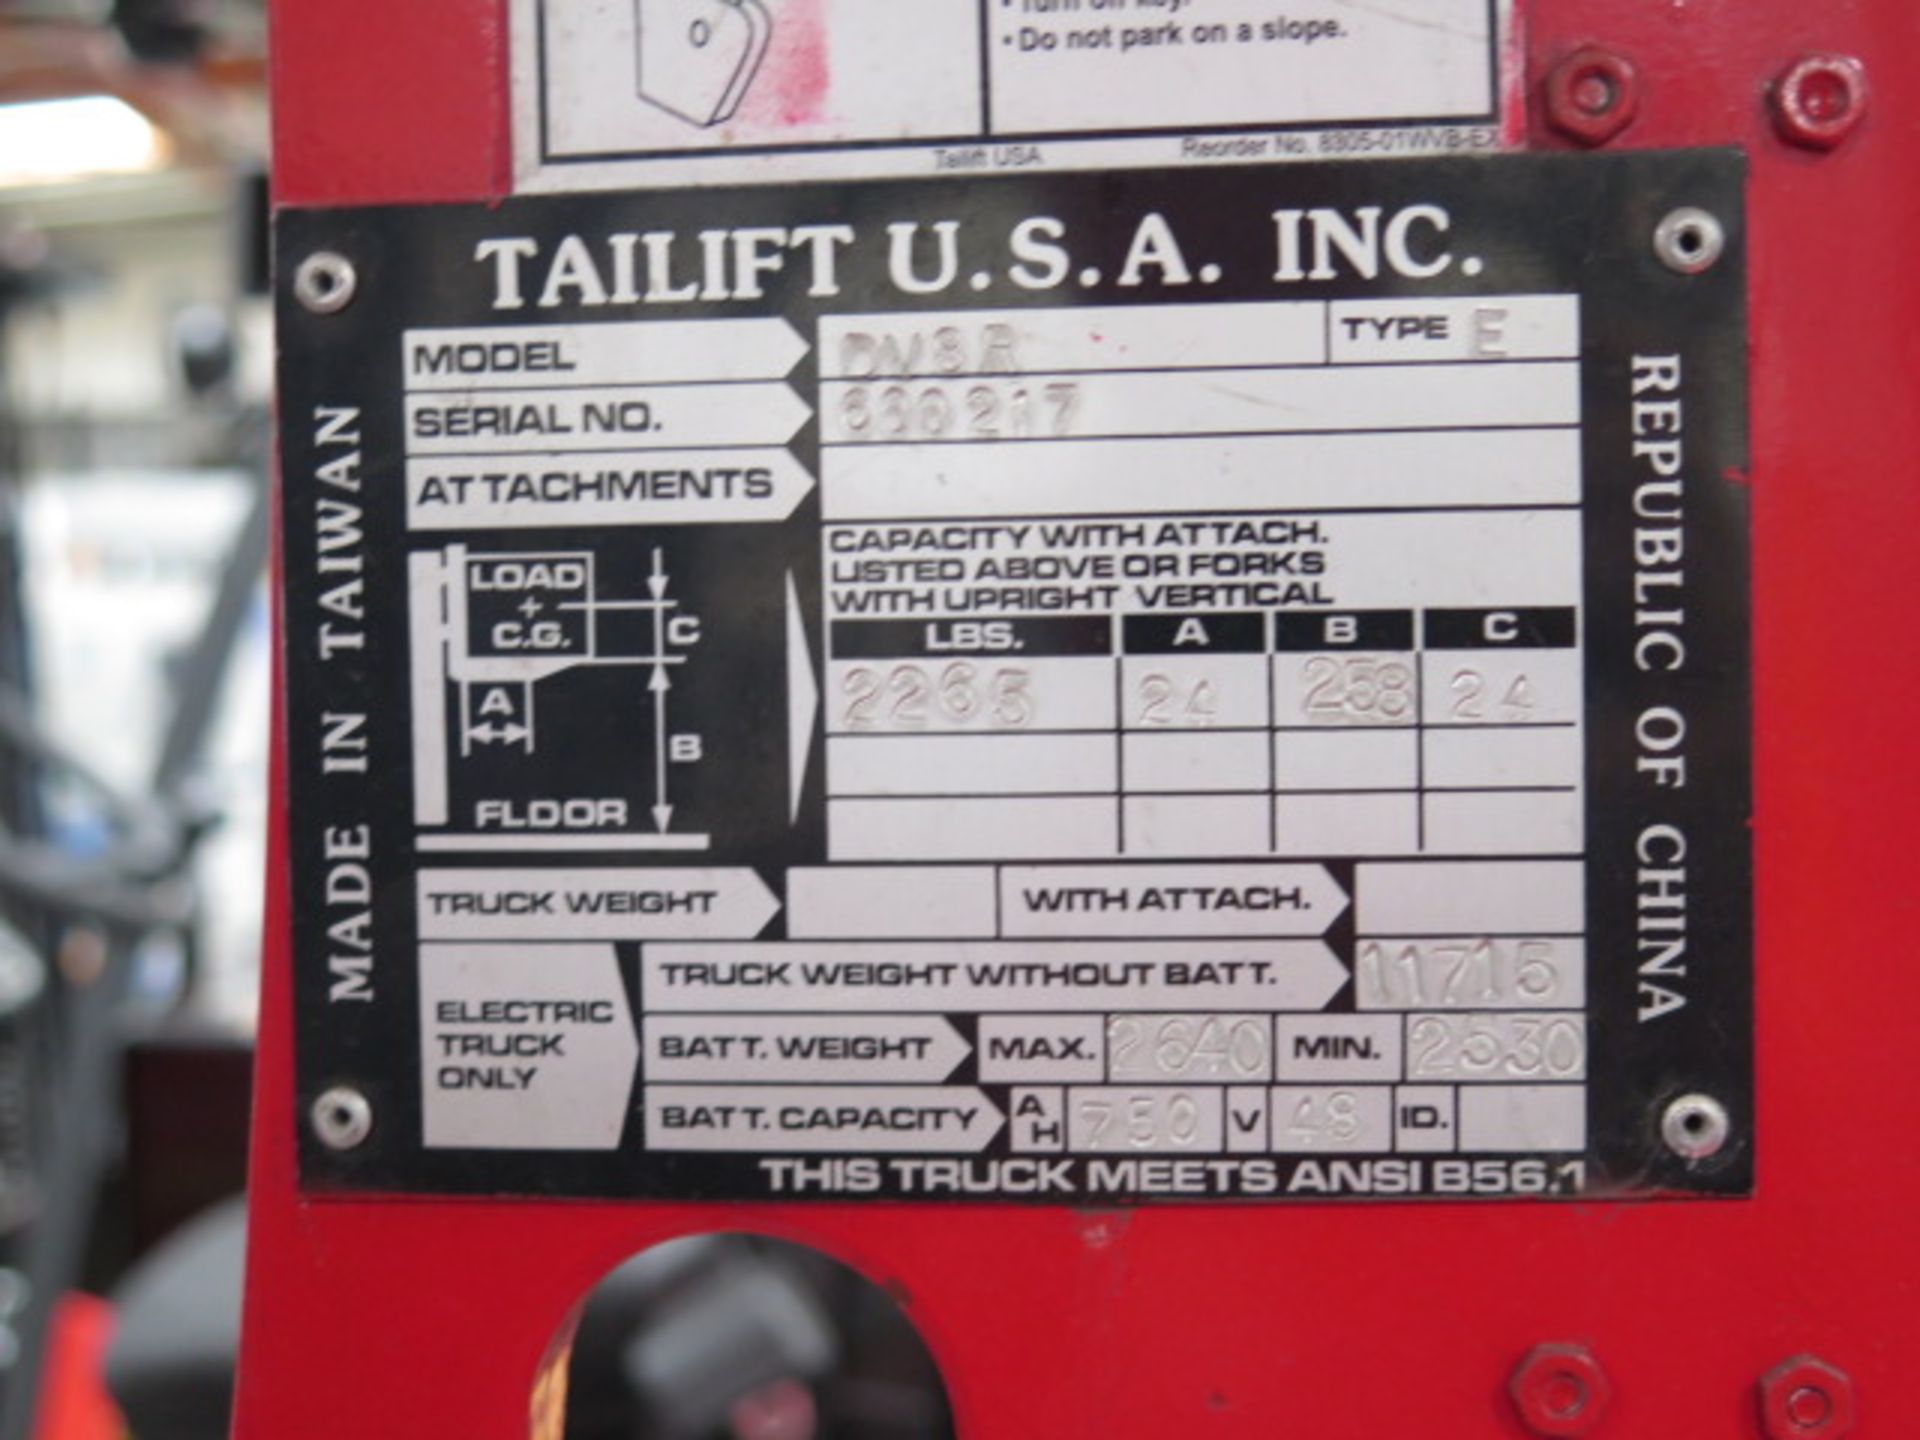 Tailift USADV8SR 2265 Lb Cap Articulating Elect Forklift s/n 600217 w/4-Stage, 258" Lift, SOLD AS IS - Image 18 of 18